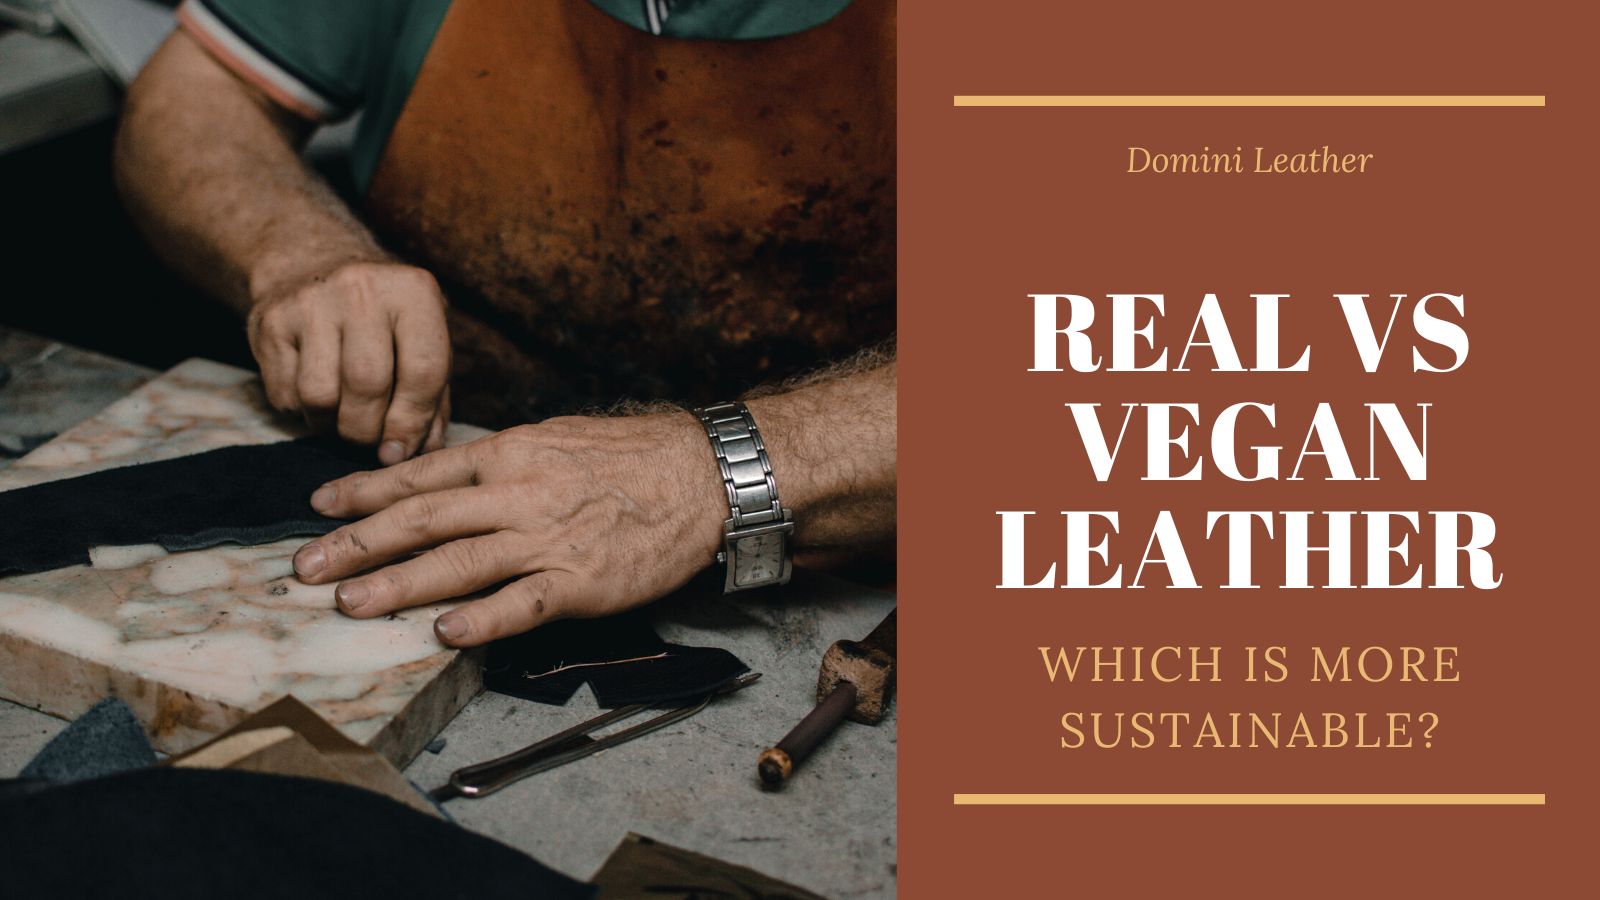 Real Vs Vegan Leather - Which is more sustainable